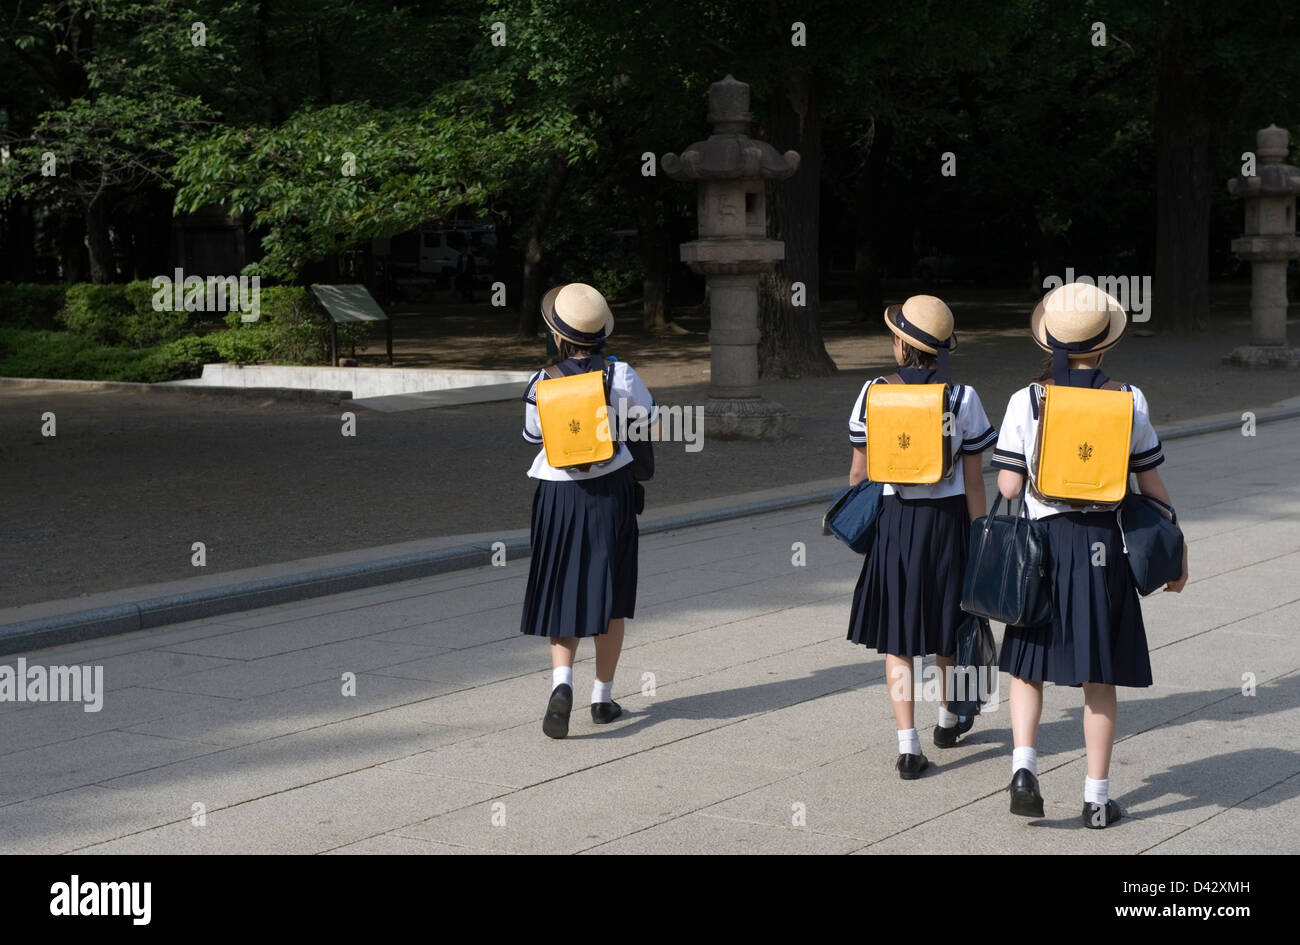 Three Japanese middle school girls wearing sailor uniforms and cute hats walking on their way home from school in Tokyo. Stock Photo